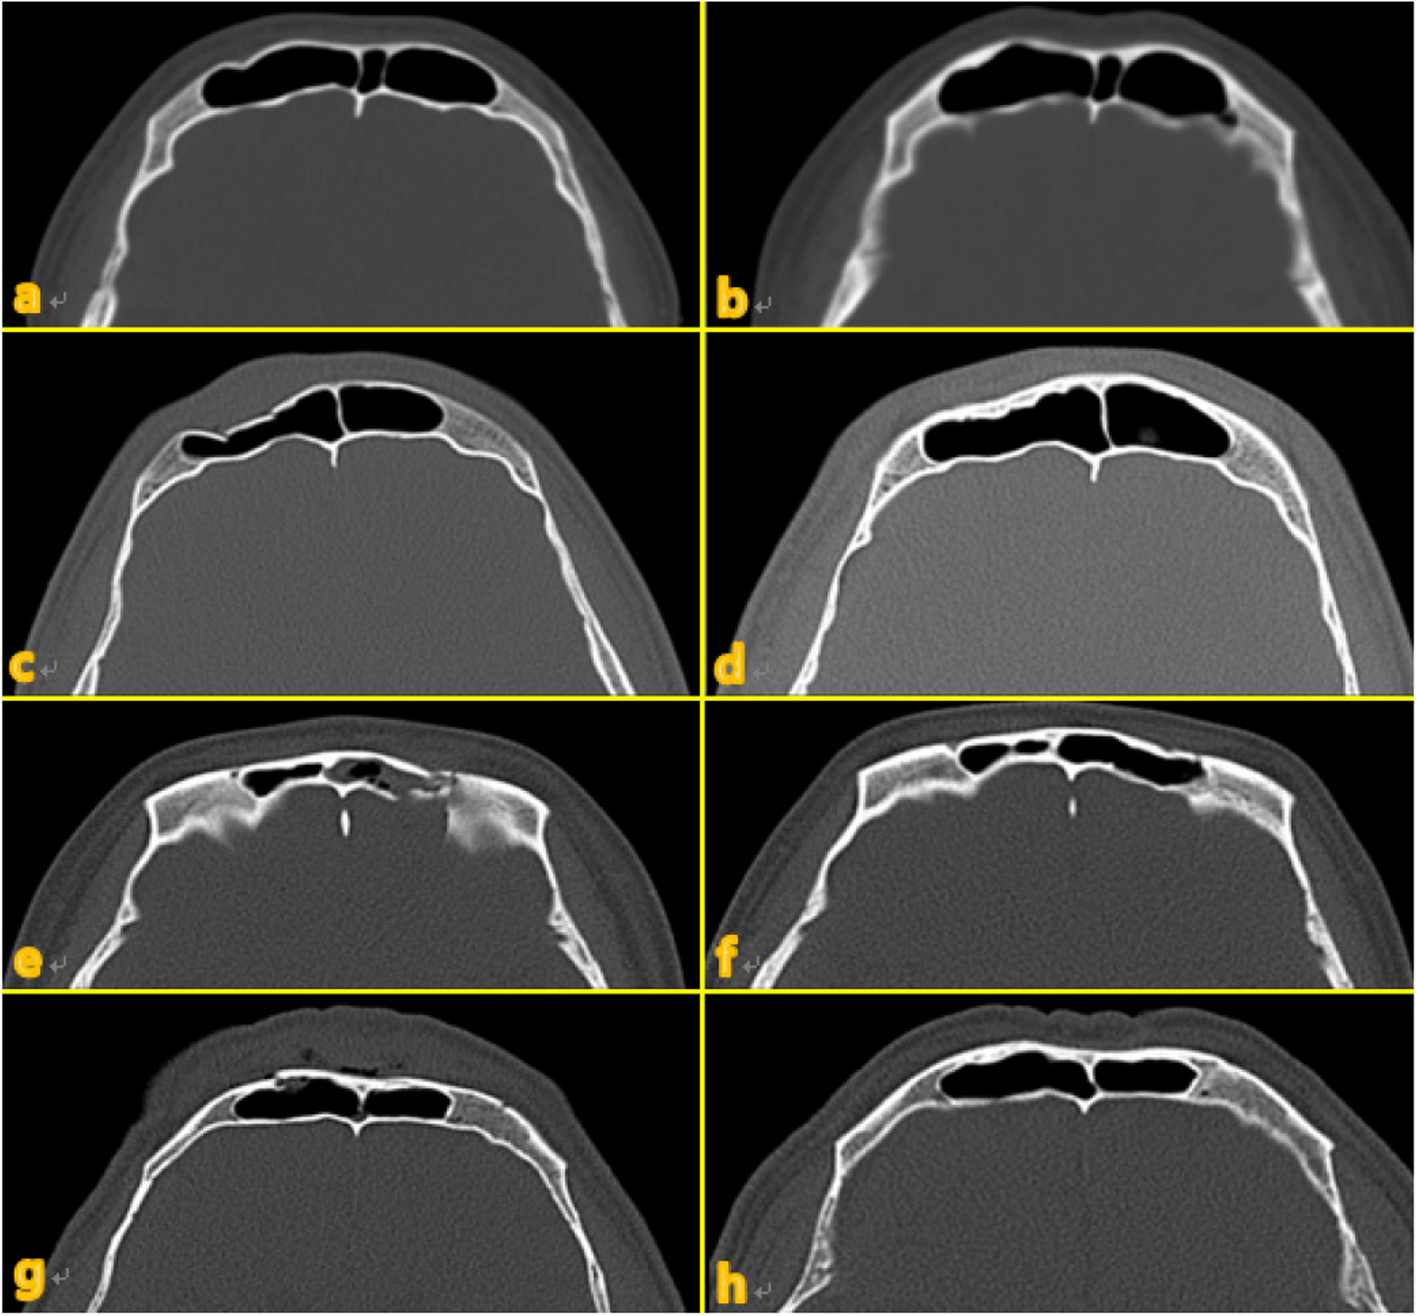 Management of frontal sinus trauma: a retrospective study of surgical interventions and complications